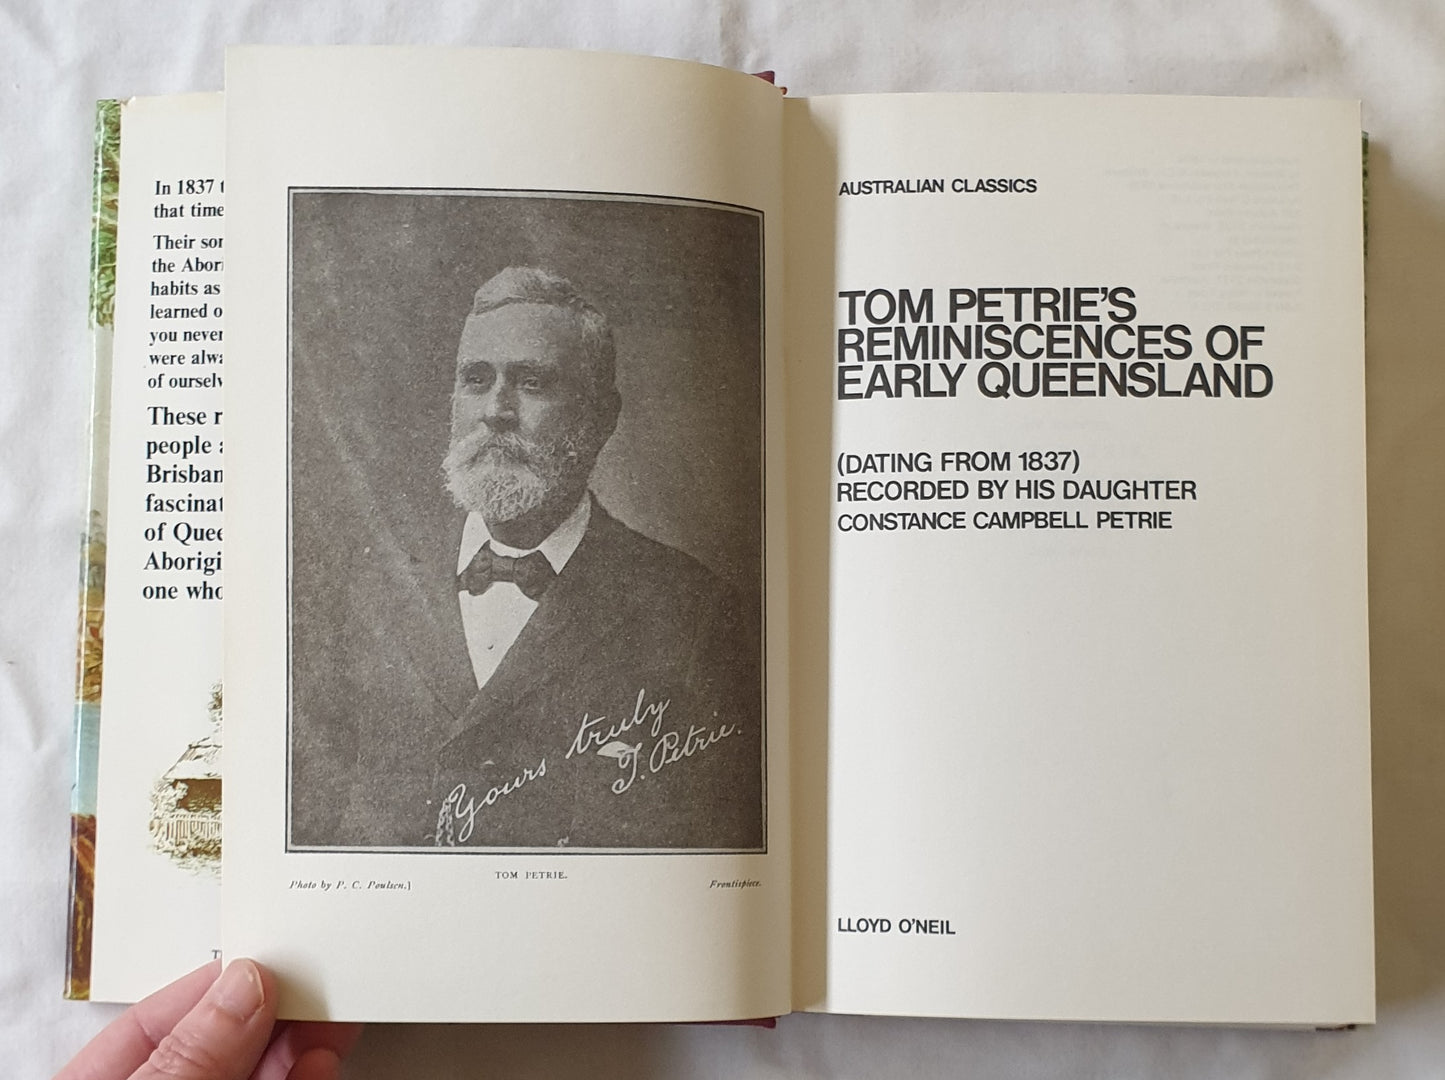 Tom Petrie’s Reminiscences of Early Queensland by Constance Campbell Petrie